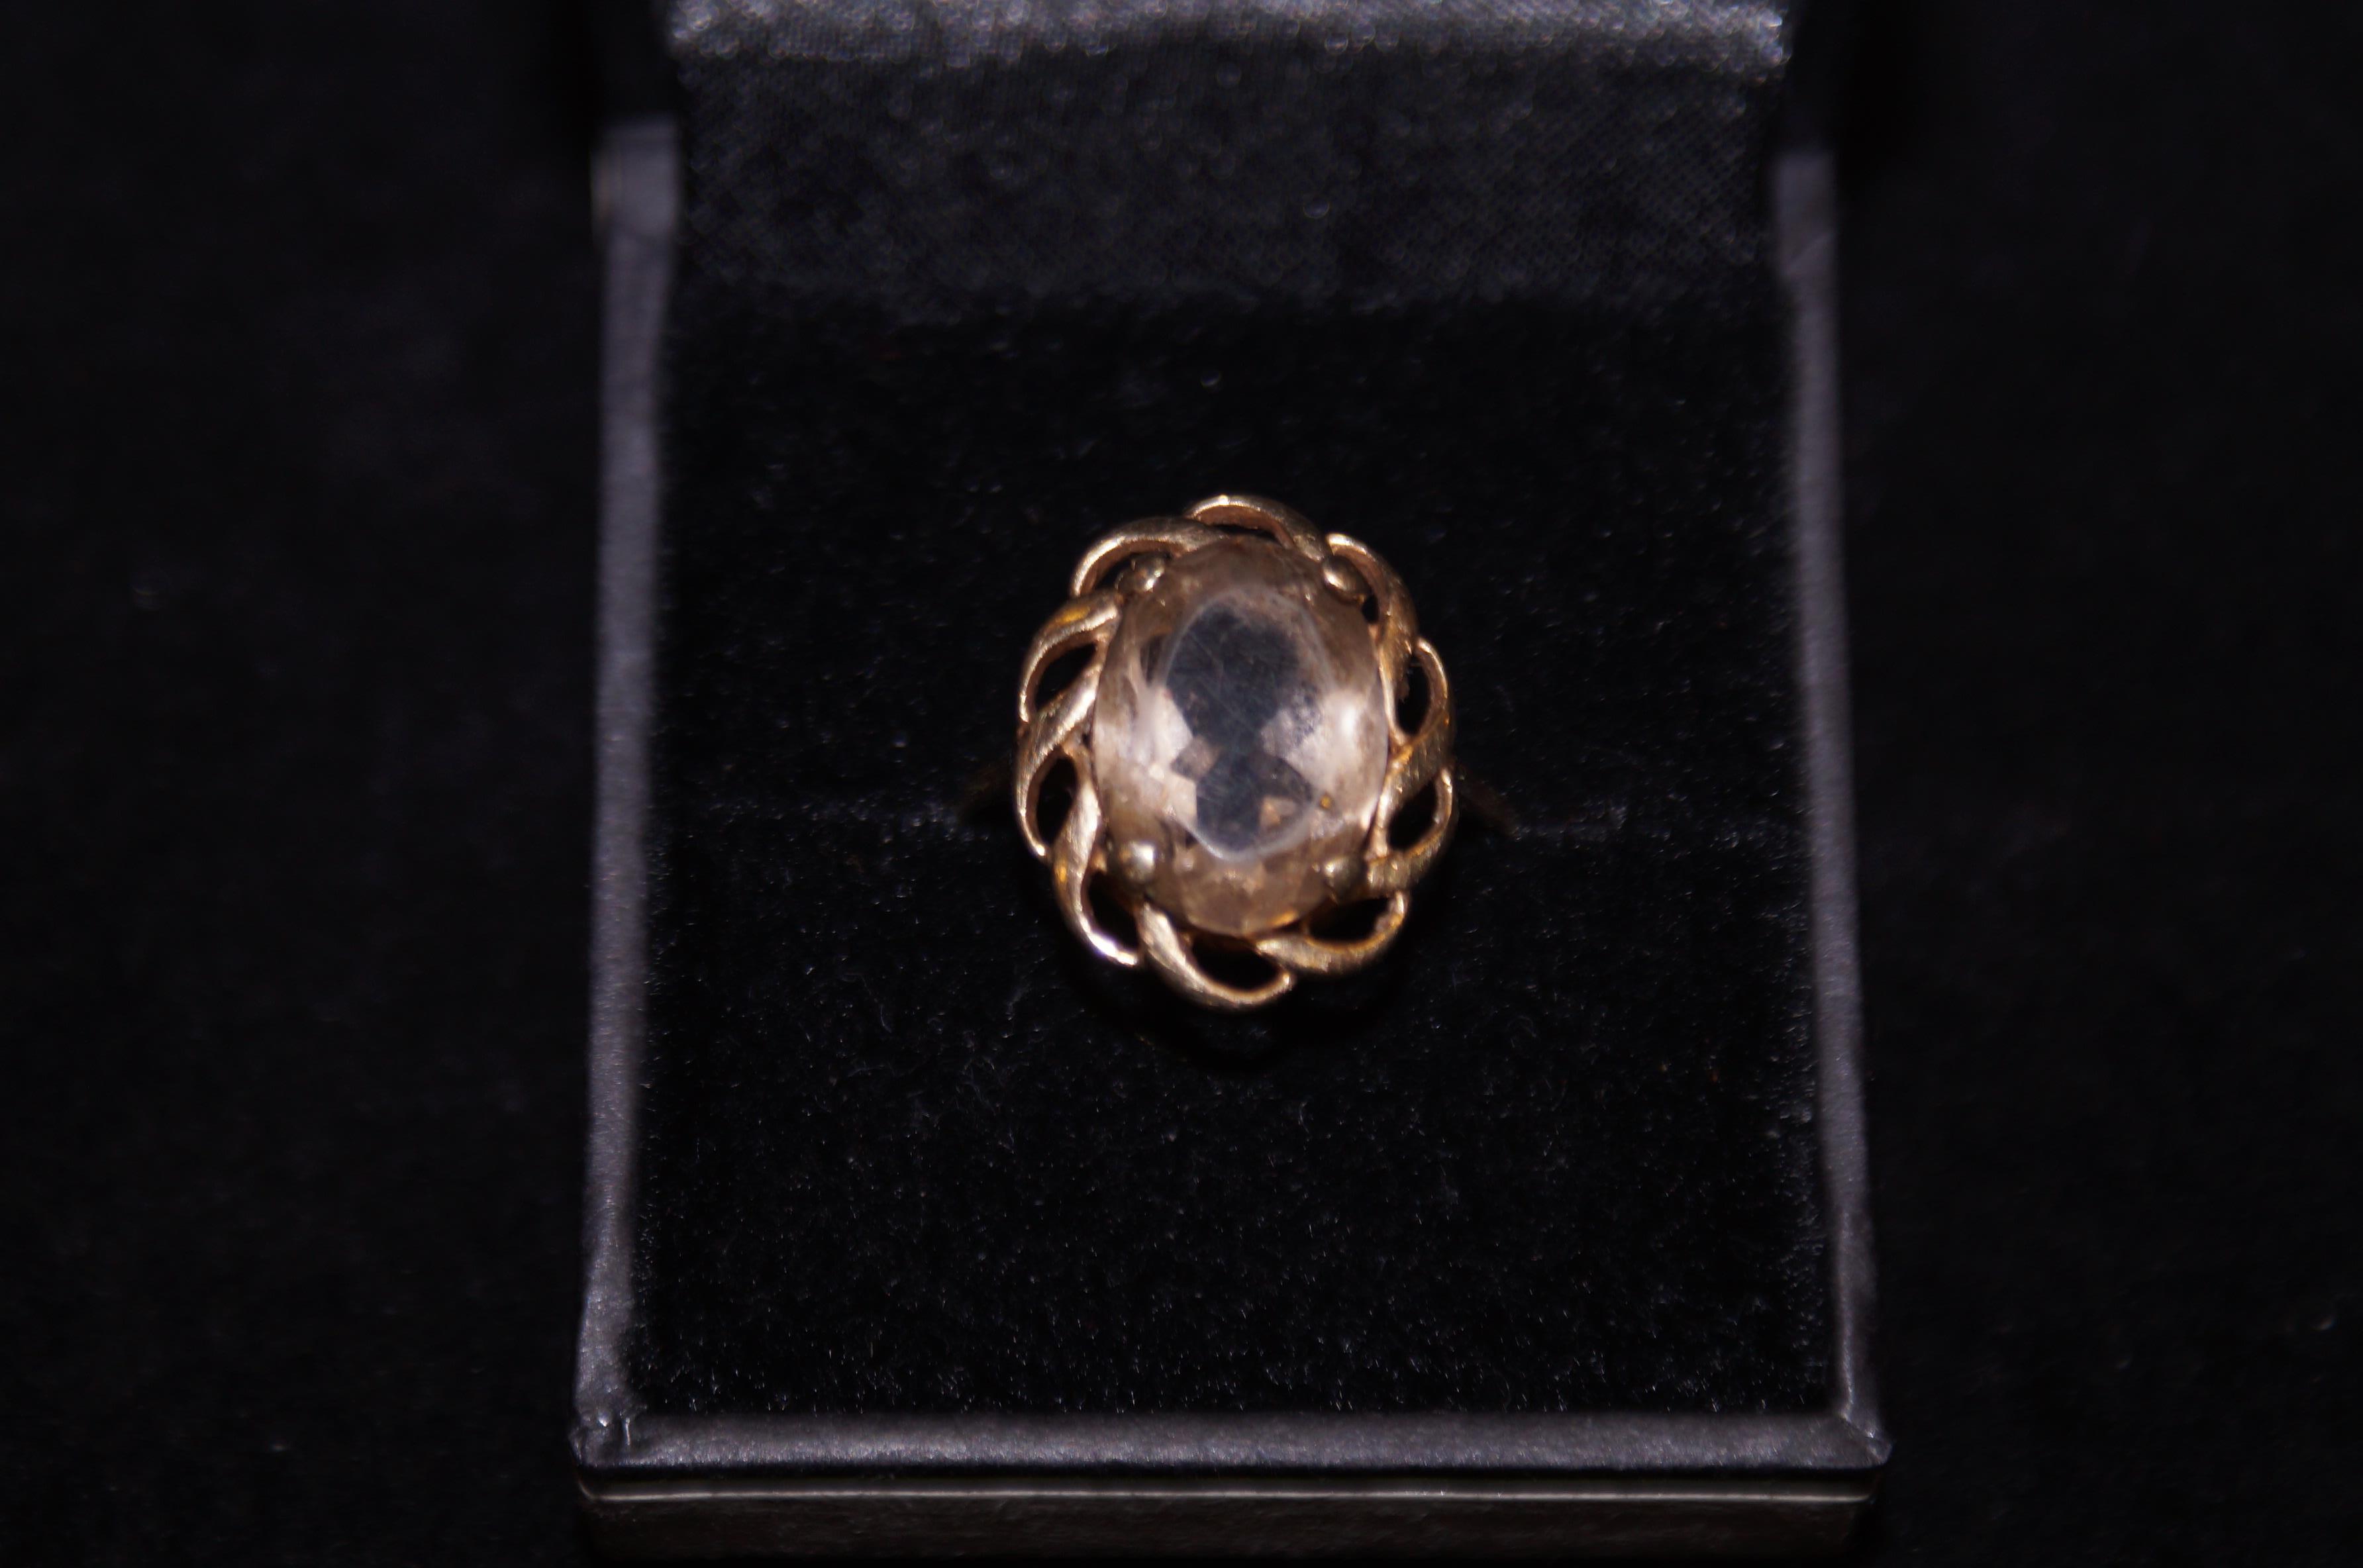 18ct Gold Ring with Large Stone - Size T